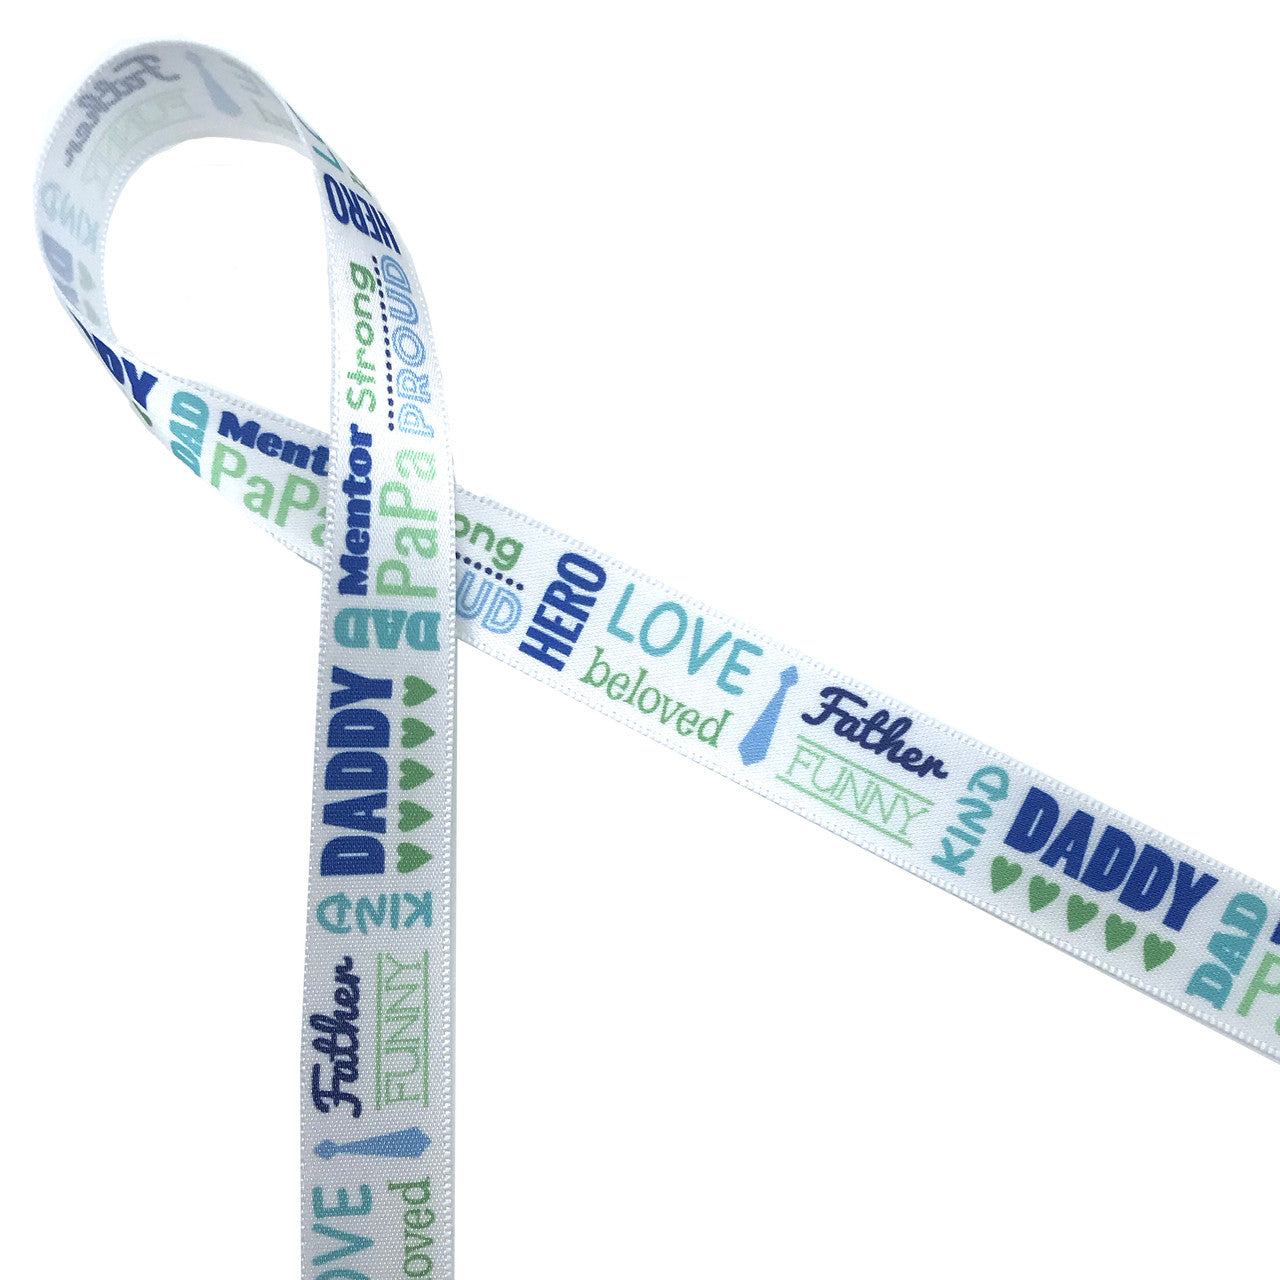 Father's Day ribbon word block in blue and green printed 7/8" white satin